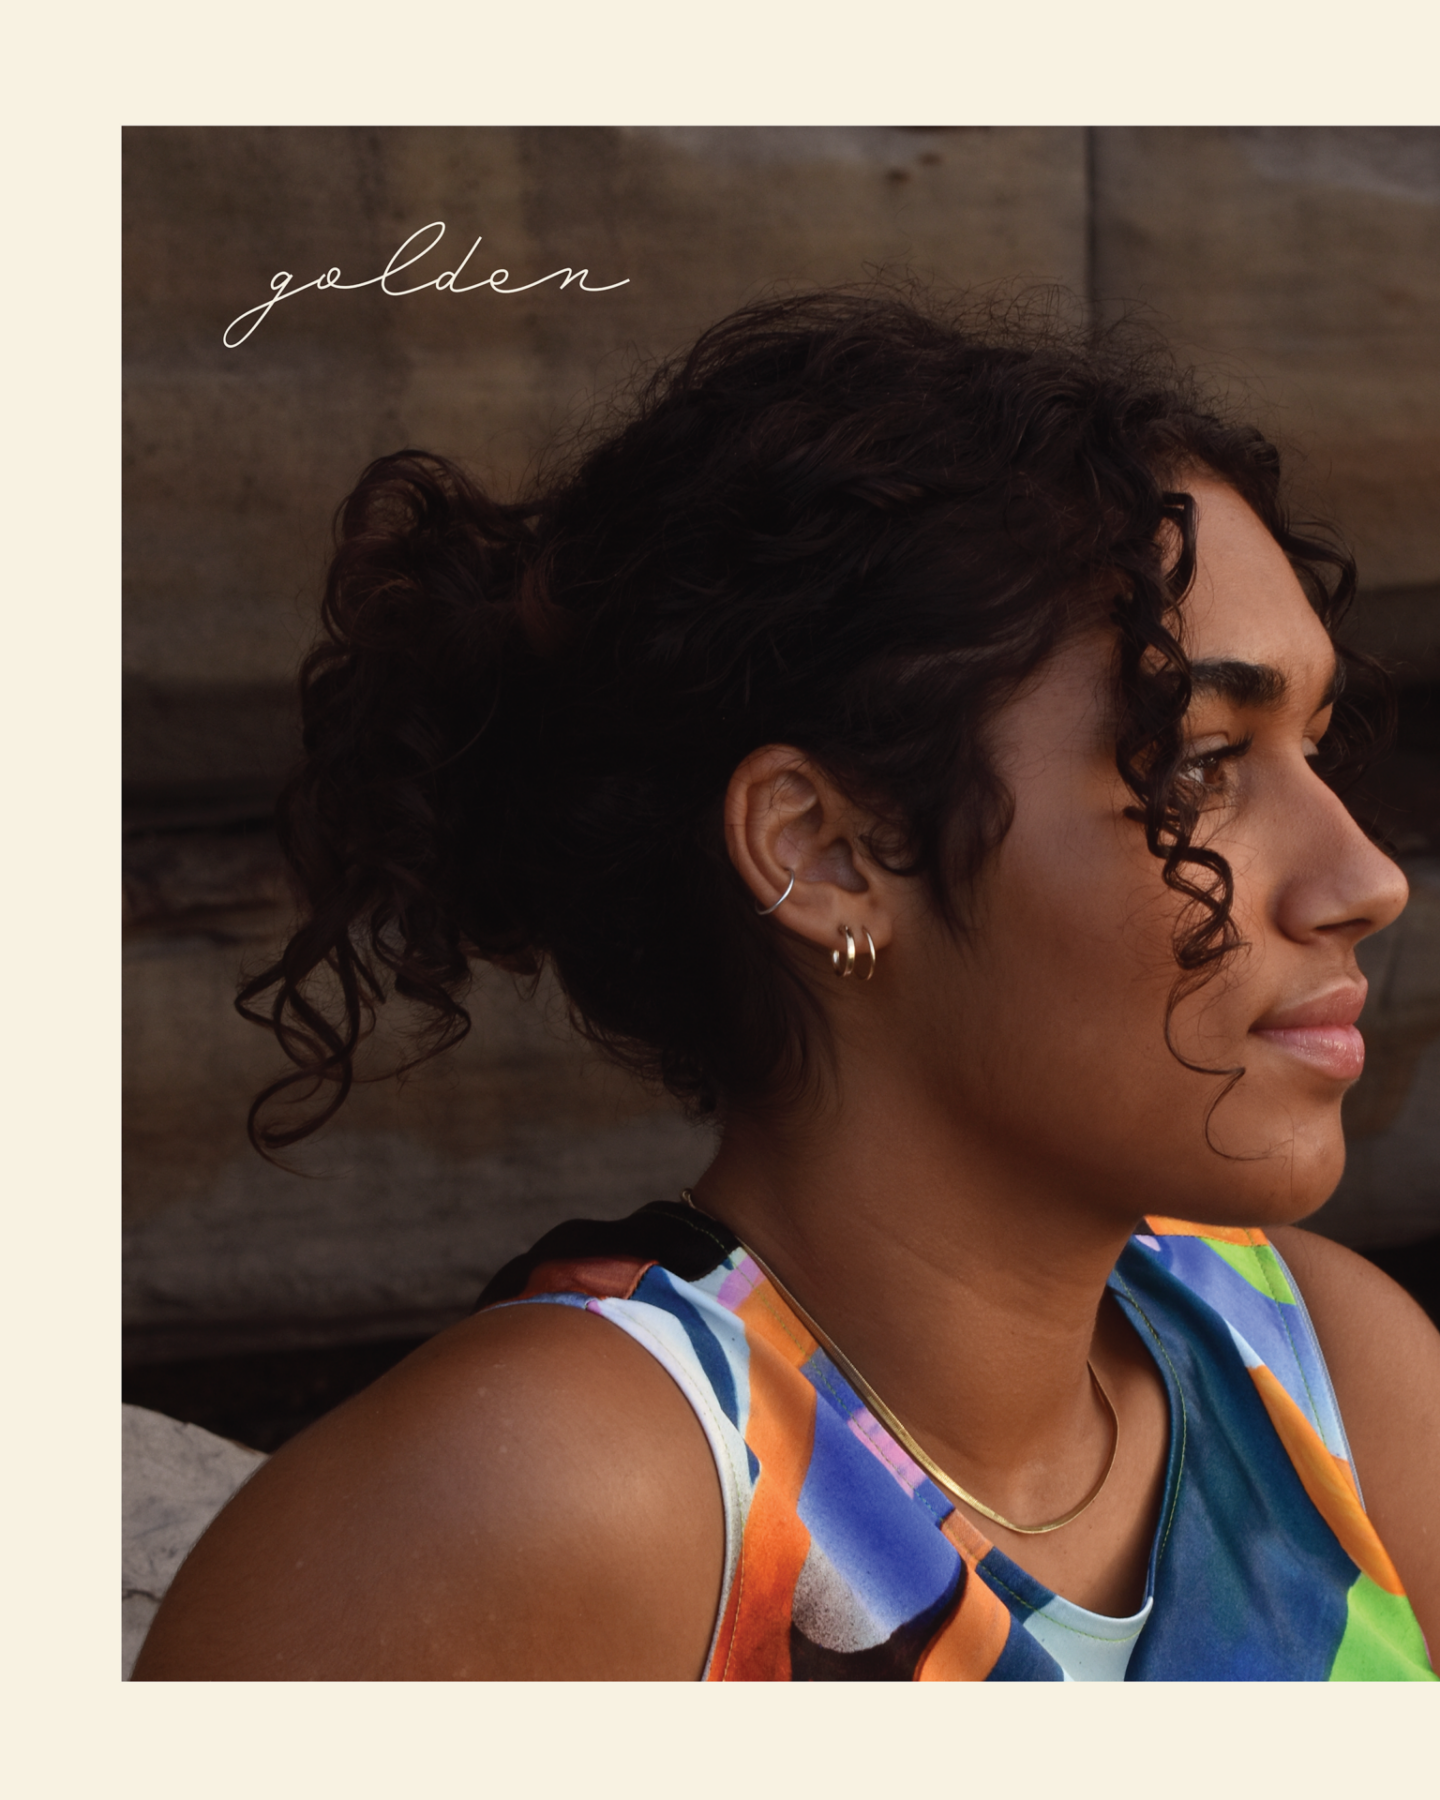 An album cover featuring a photograph of a young woman in profile, with dark skin and curly black hair worn up, and three small gold hoop earrings